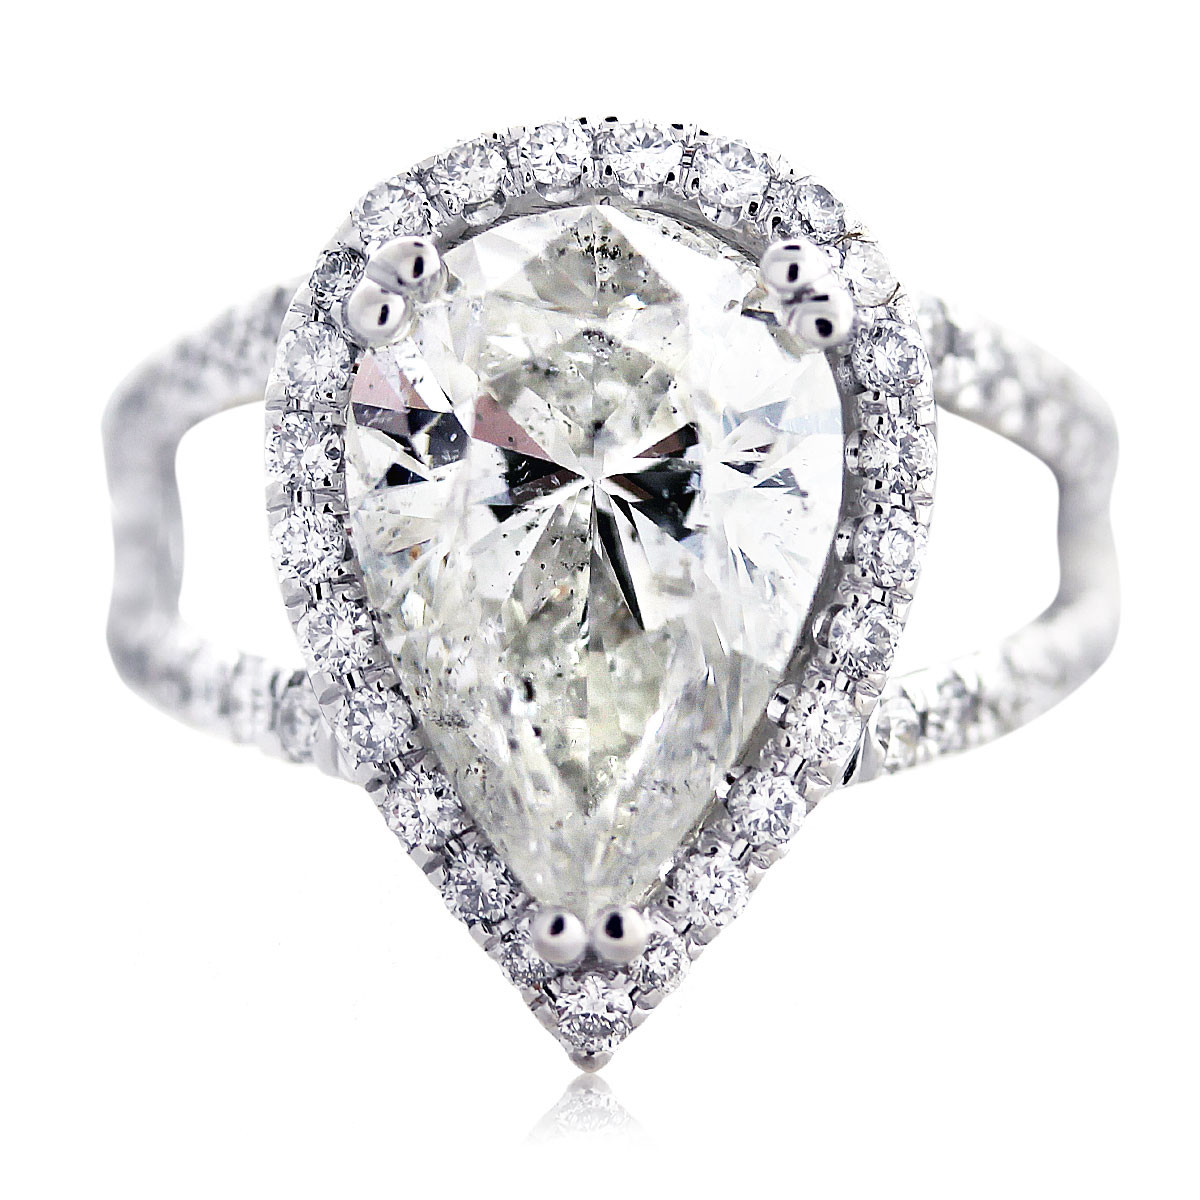 Pear Shaped Diamond Engagement Rings
 18k White Gold Micro Pave 4 58ct Pear Shaped Diamond